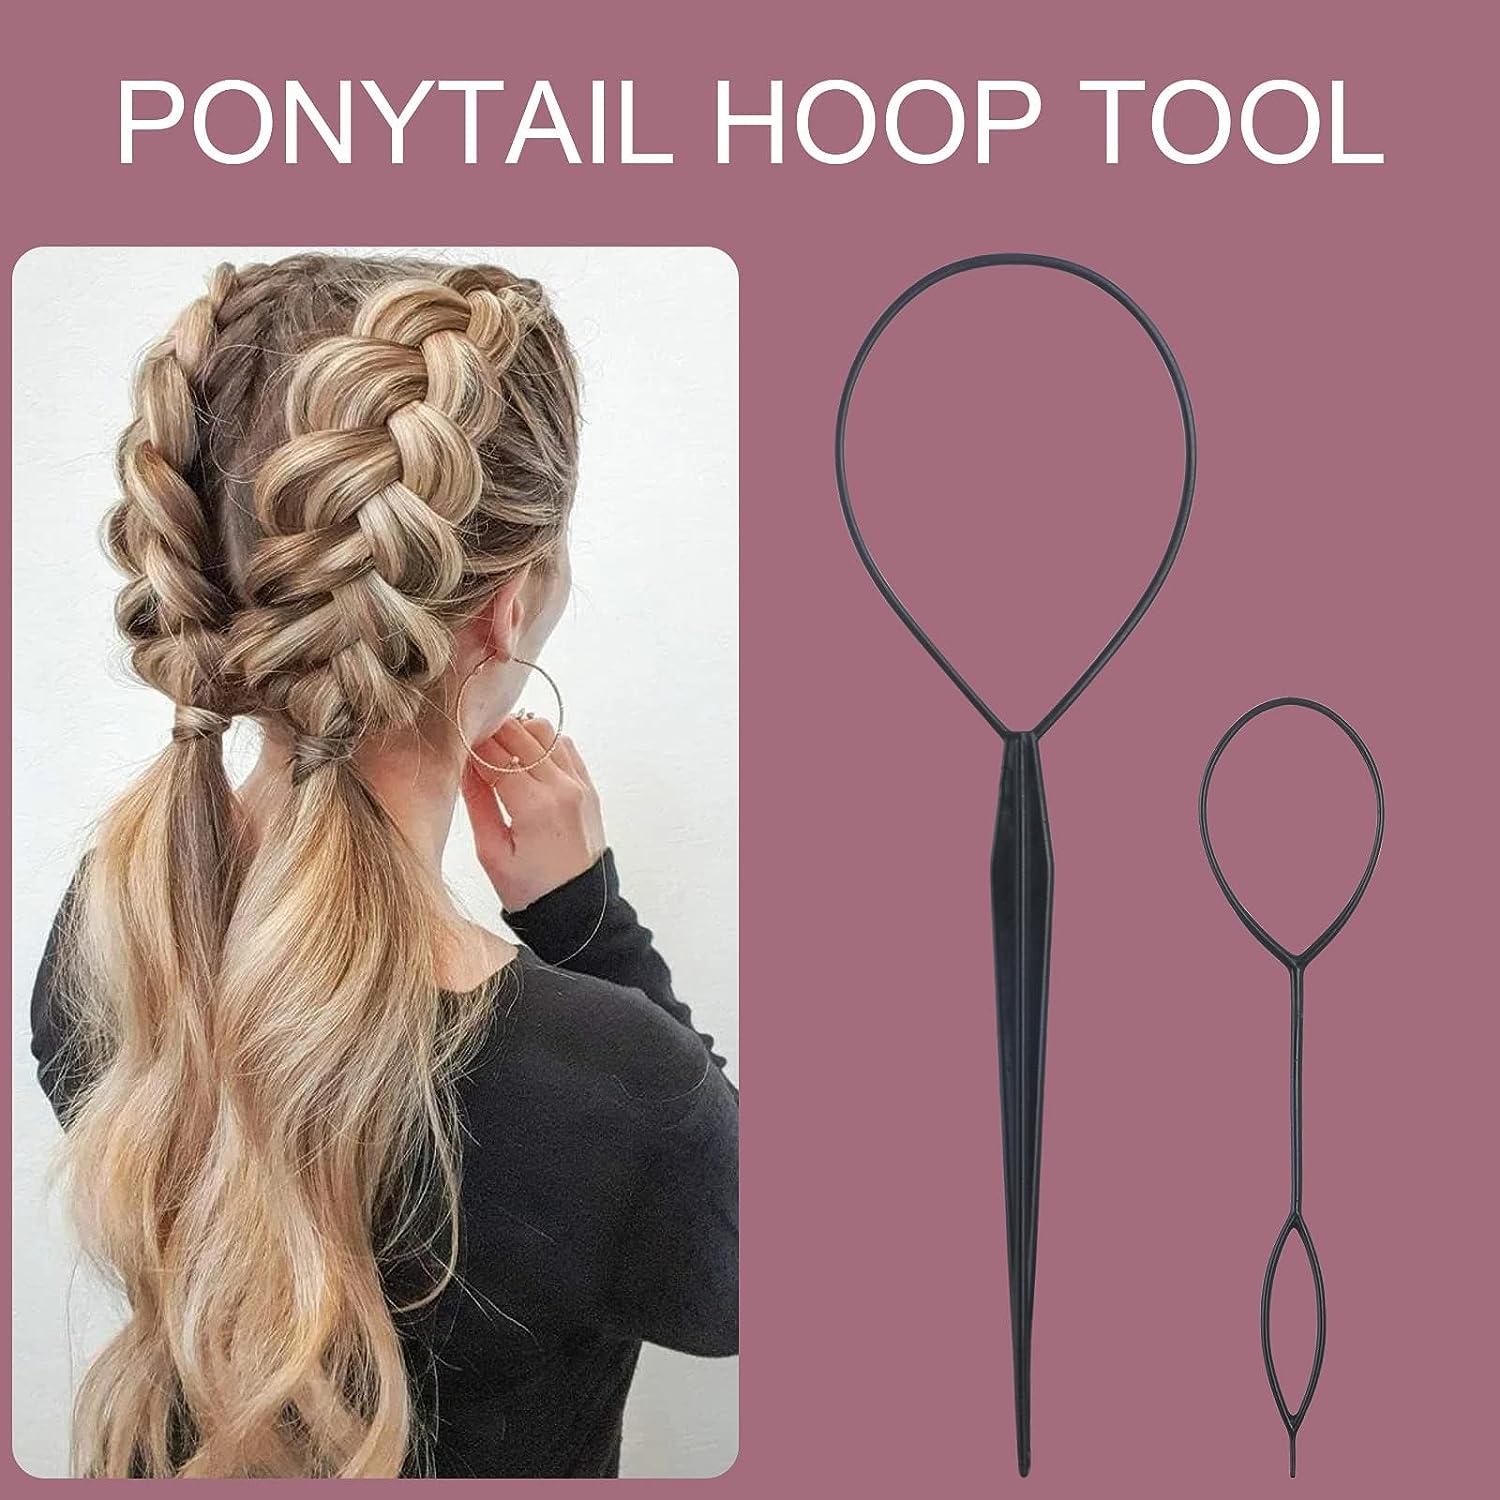 3pcs Topsy Tail Hair Tool,Hair Braiding Tool,Ponytail Holders,French Braid  Loop Tool Pink with Rat tail comb,Hair Braiding Tool Topsy Tail Loop French